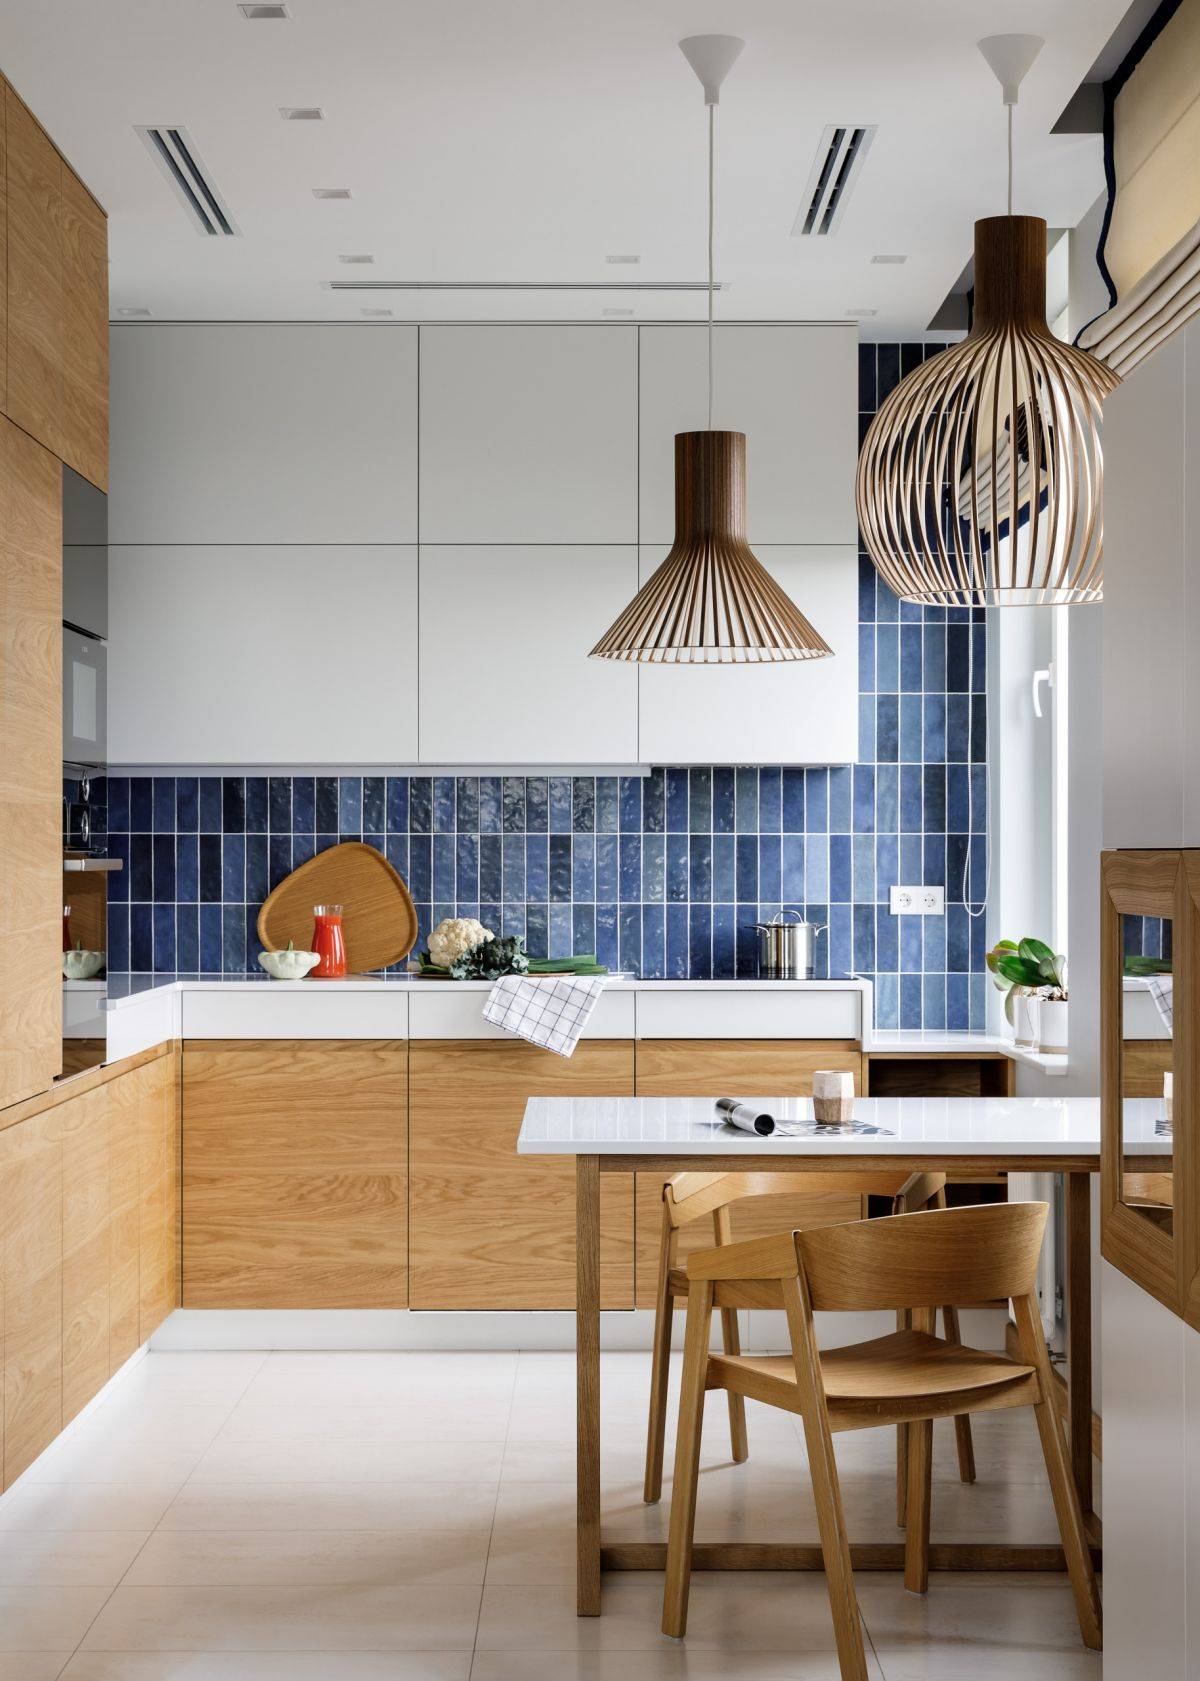 Backsplash-with-vertical-tile-pattern-in-blue-is-perfect-for-the-trendy-modern-neutral-kitchen-64987